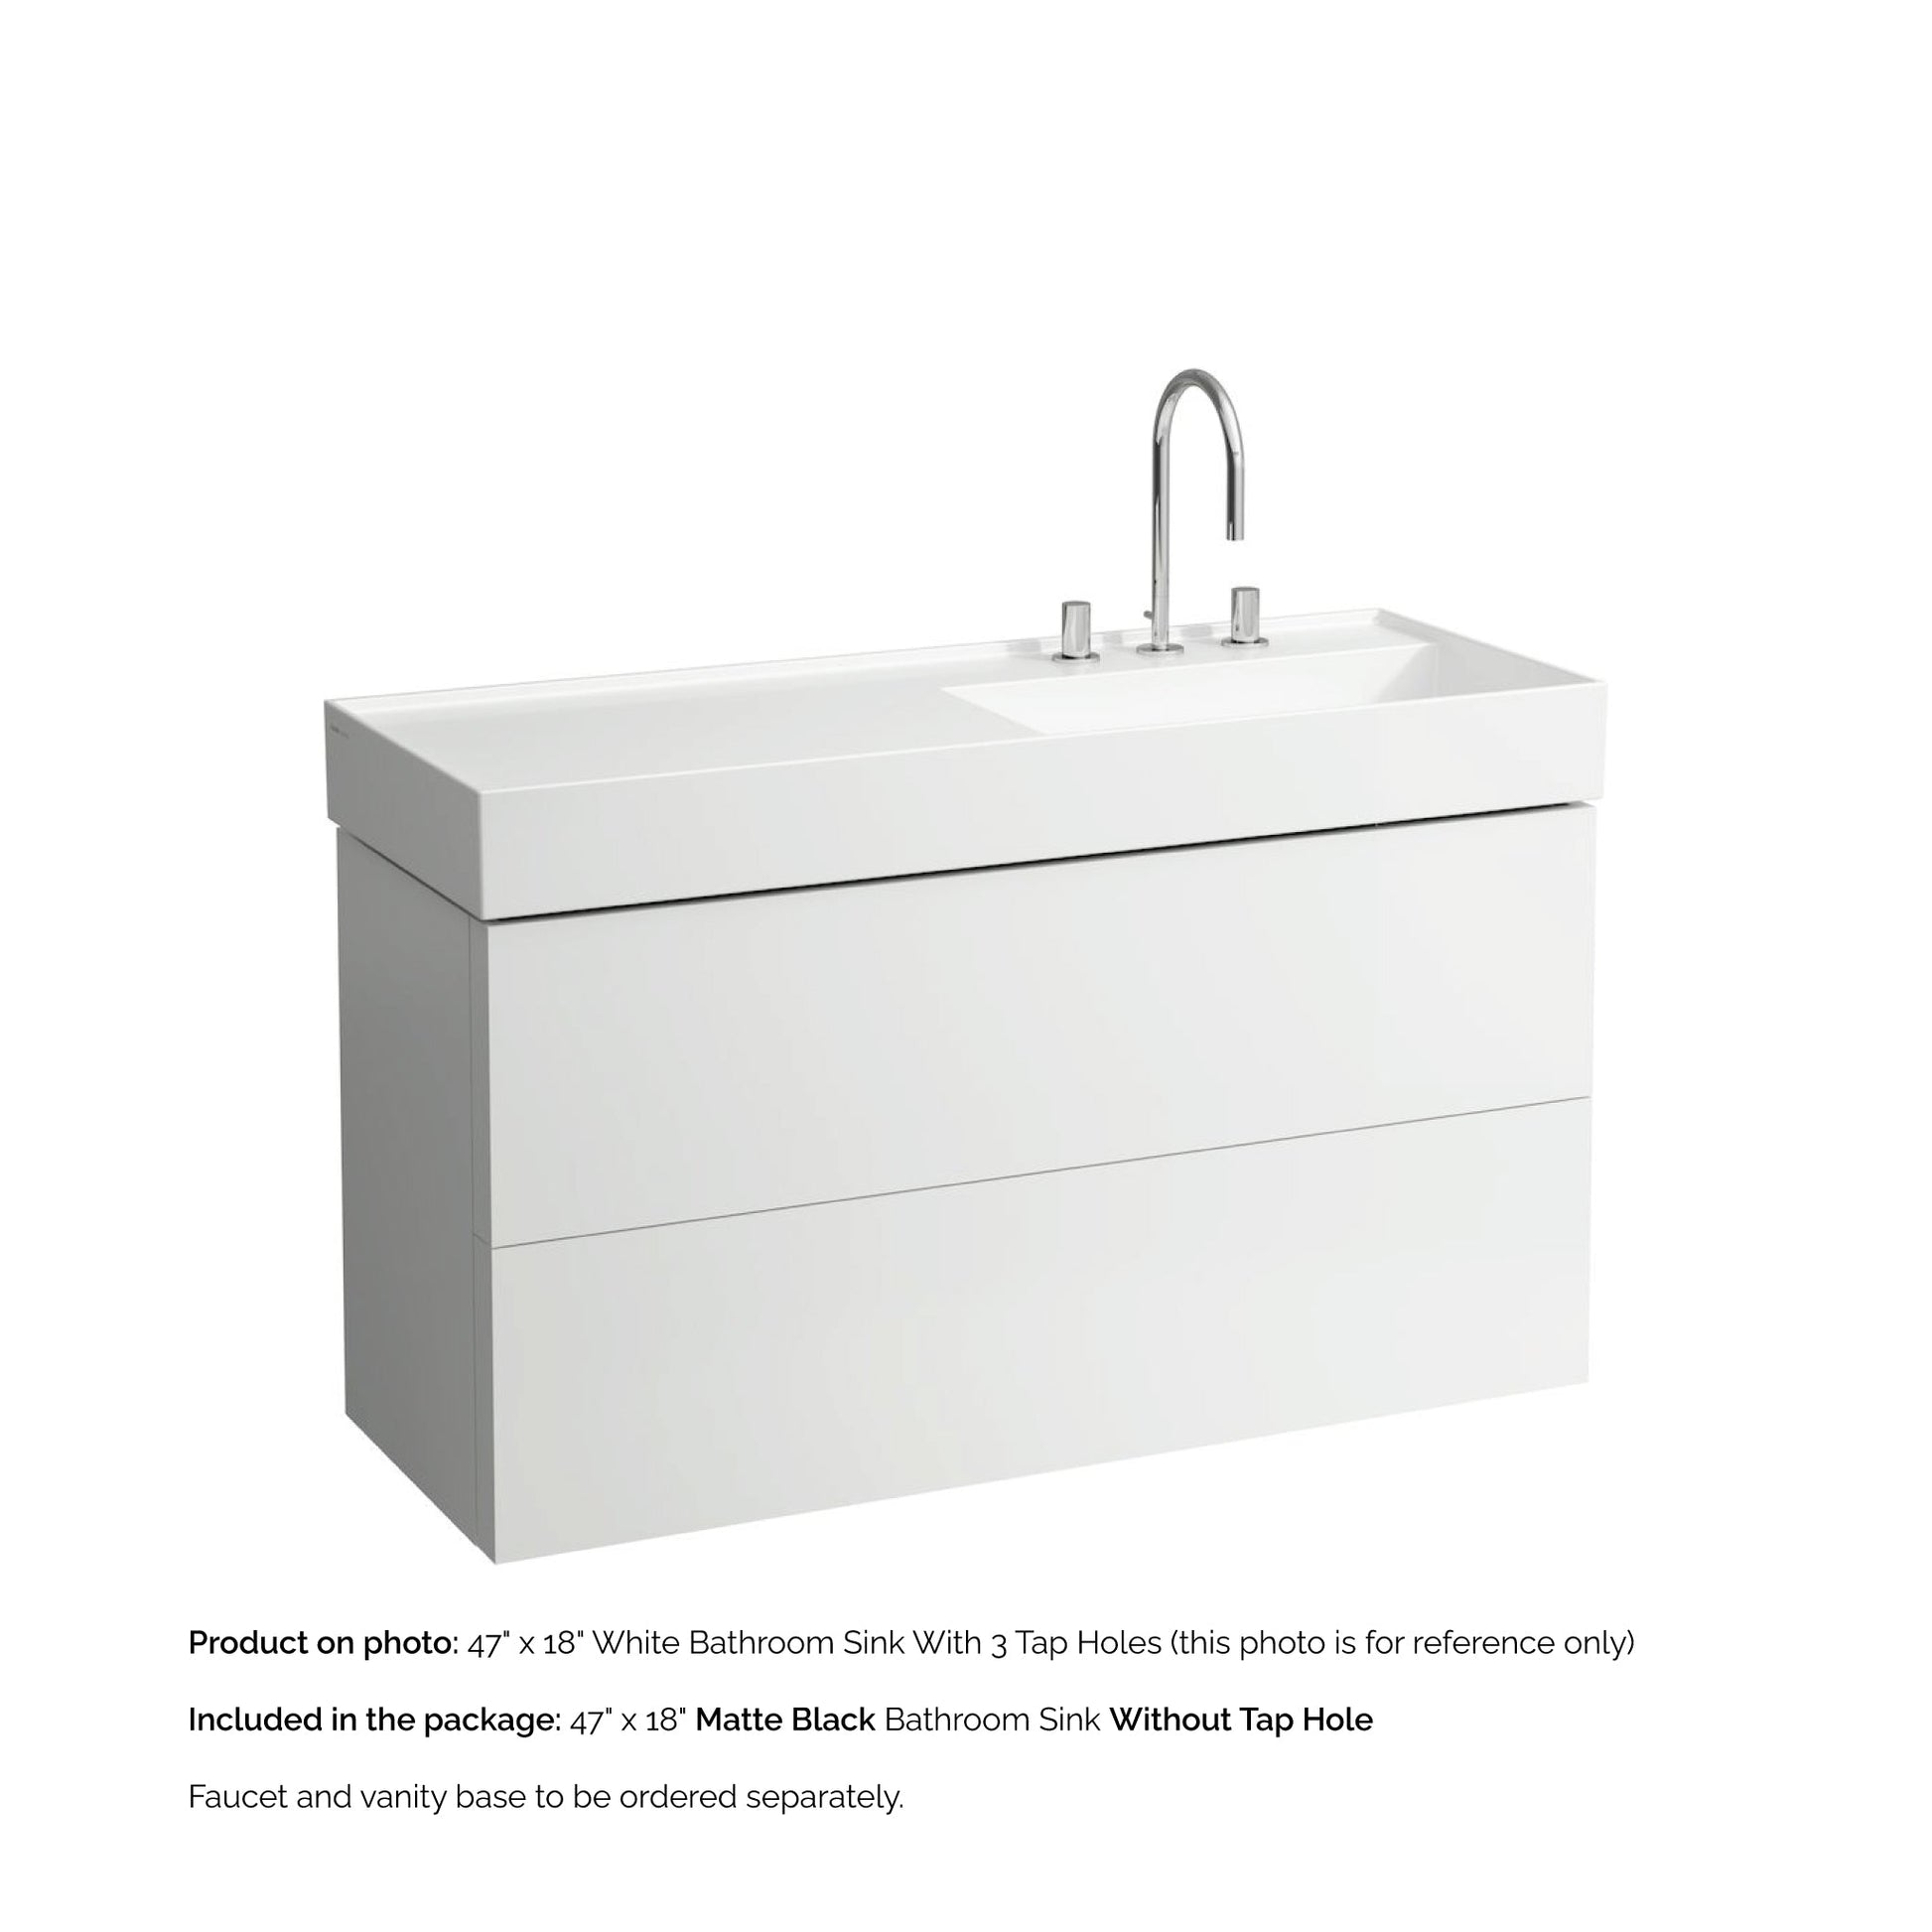 Laufen Kartell 47" x 18" Matte Black Wall-Mounted Shelf-Left Bathroom Sink Without Faucet Hole